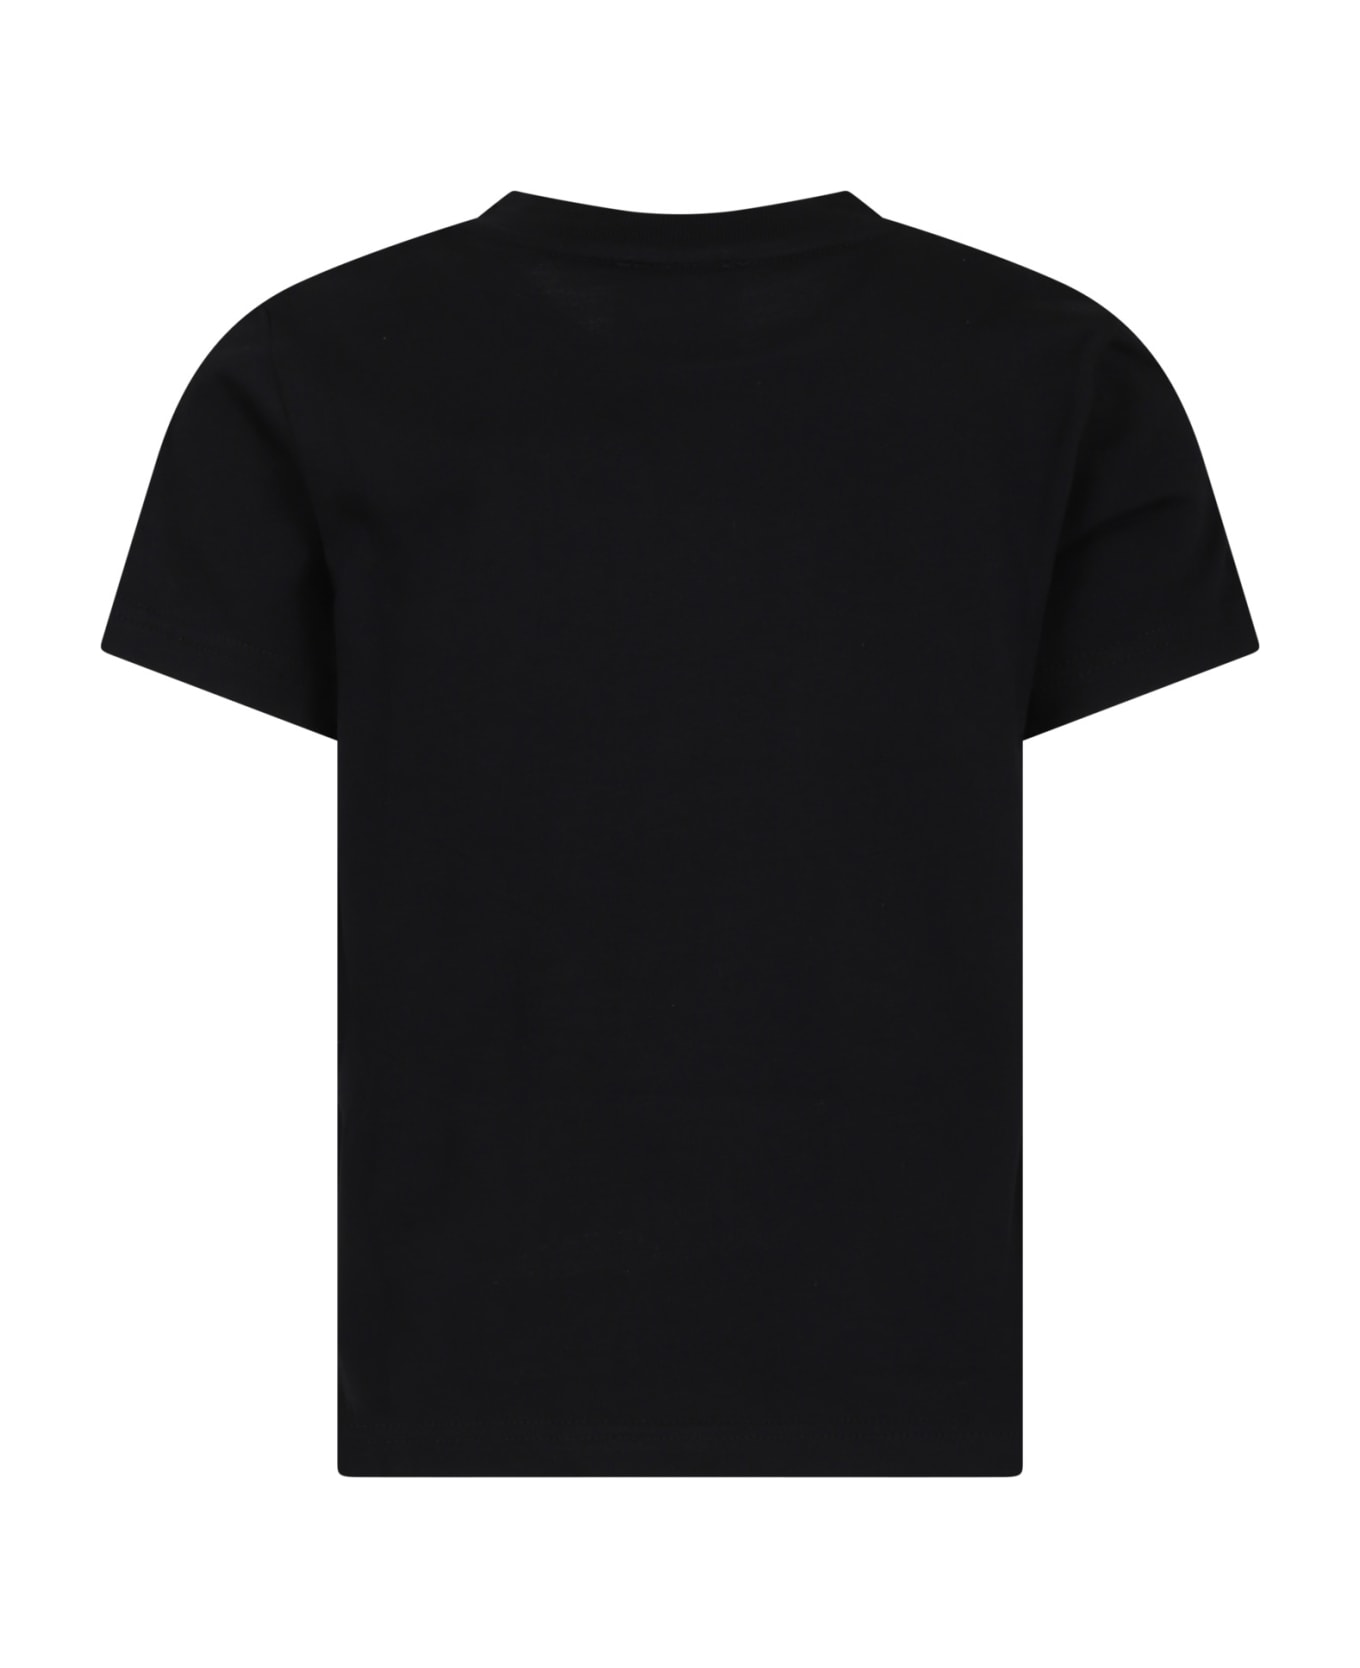 Givenchy Black T-shirt For Boy With Logo - Black